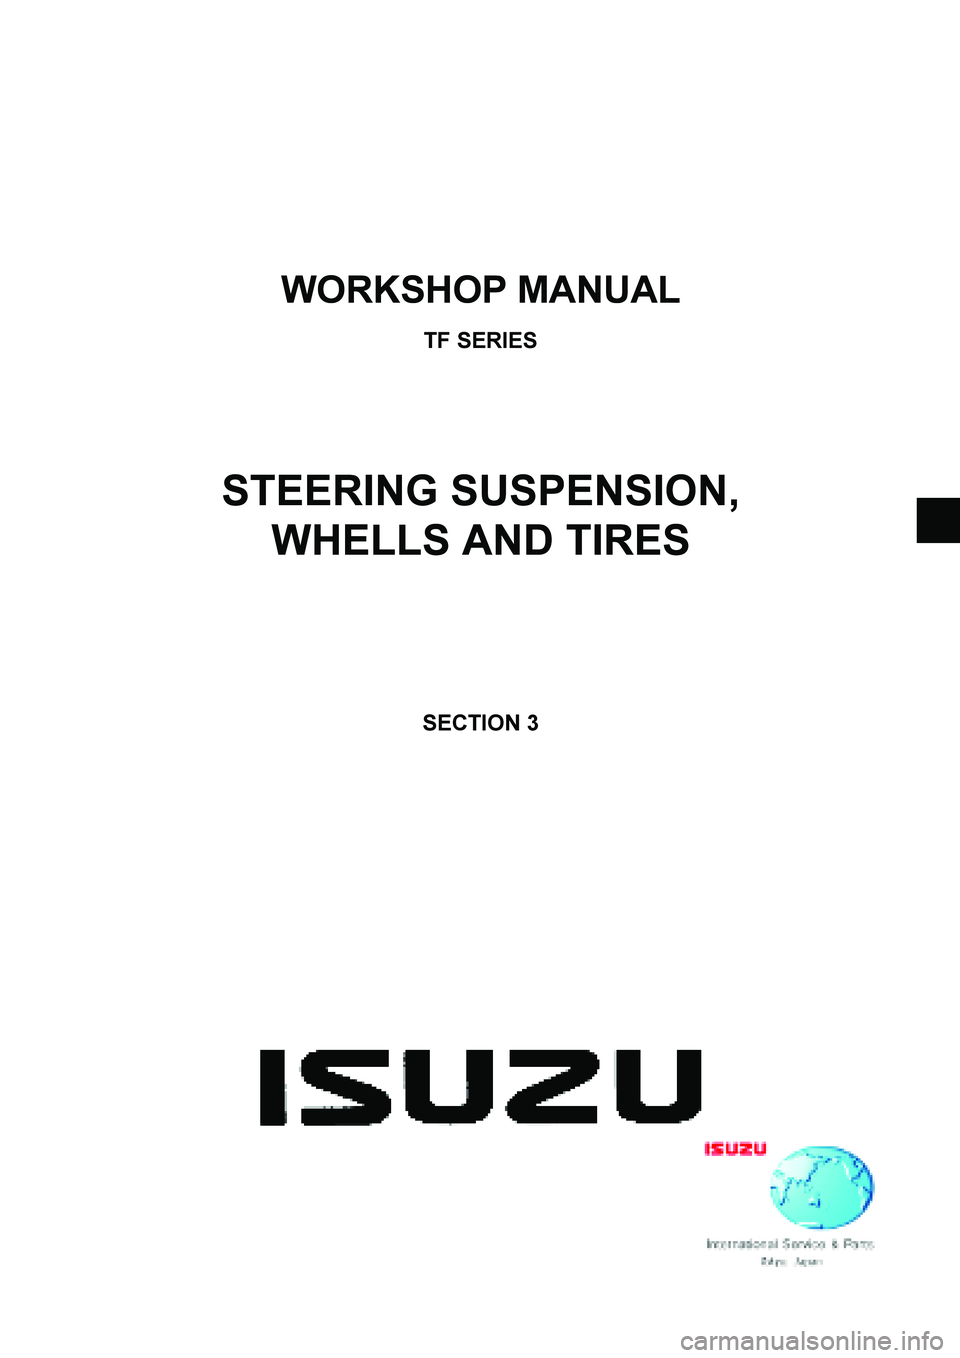 ISUZU TF SERIES 2004  Workshop Manual  
 
 
WORKSHOP MANUAL 
TF SERIES 
STEERING SUSPENSION, 
WHELLS AND TIRES 
 
SECTION 3 
  